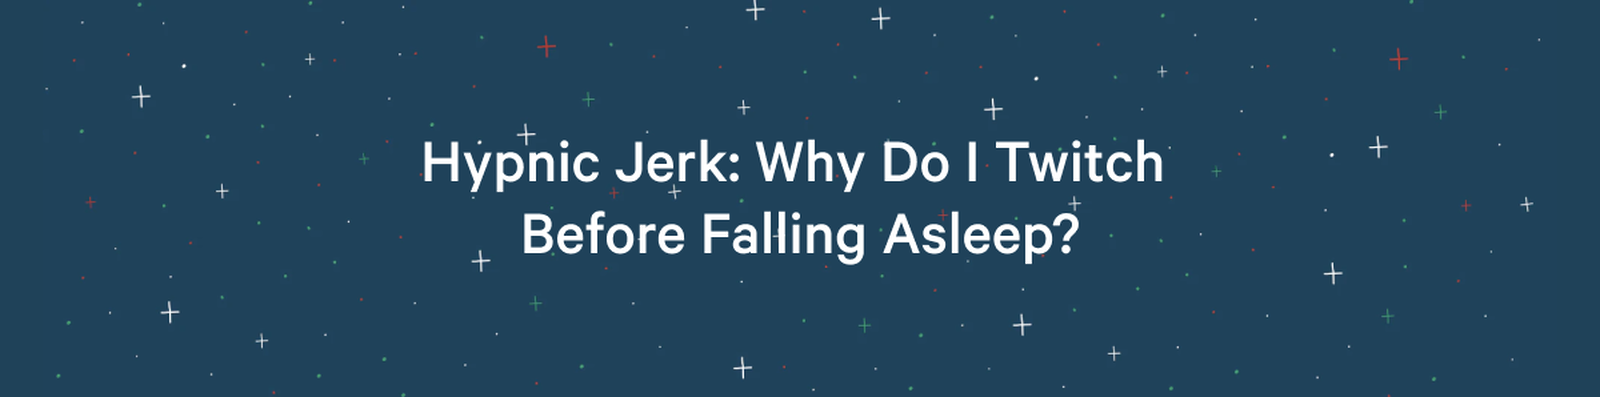 Hypnic Jerk: Why Do I Twitch Before Falling Asleep? >>